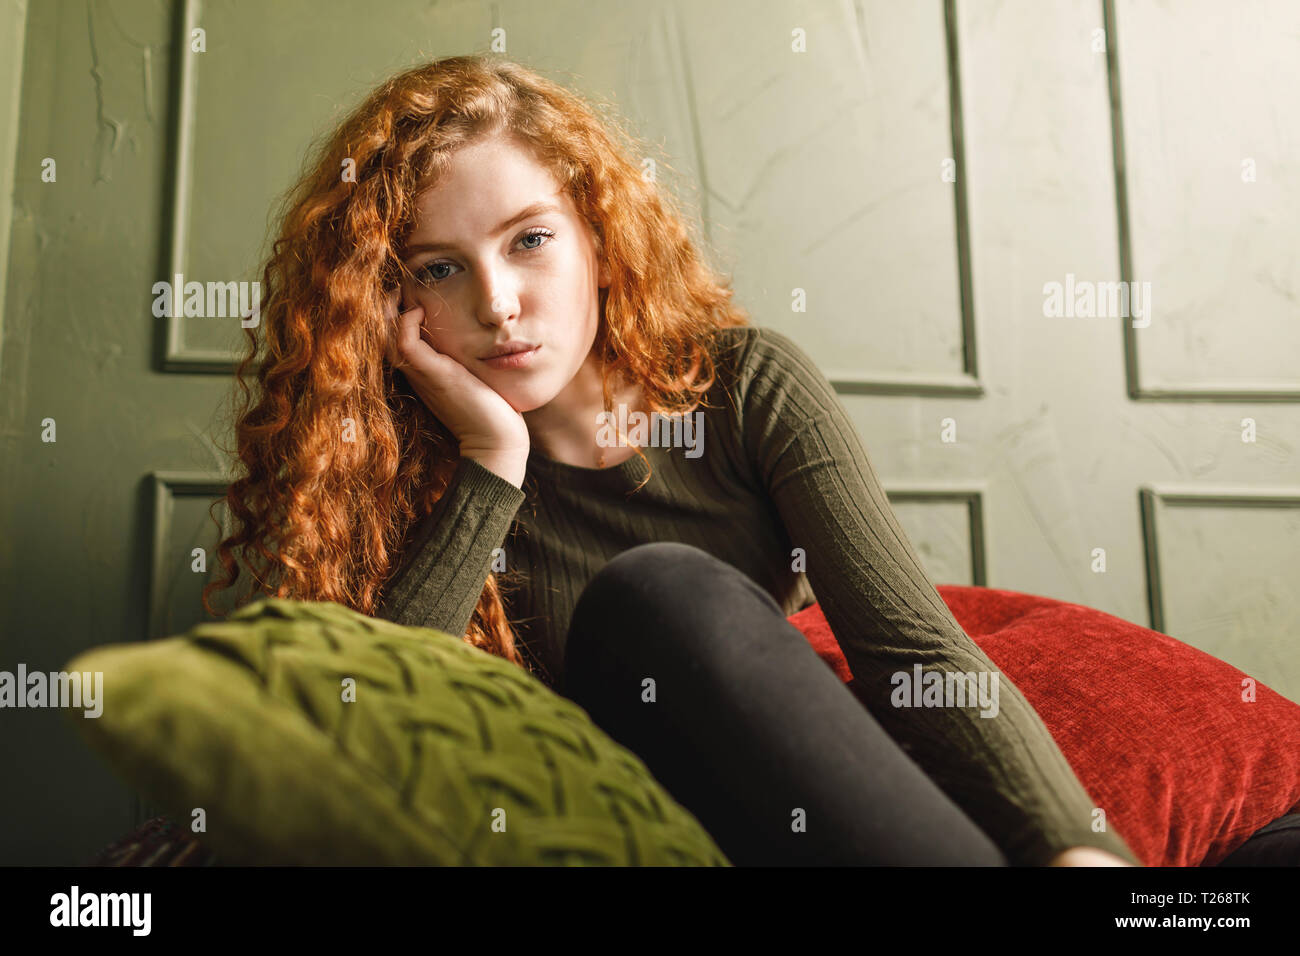 Curly redhead girl propped up her head and sitting at the sofa around the pillows in the green interior Stock Photo